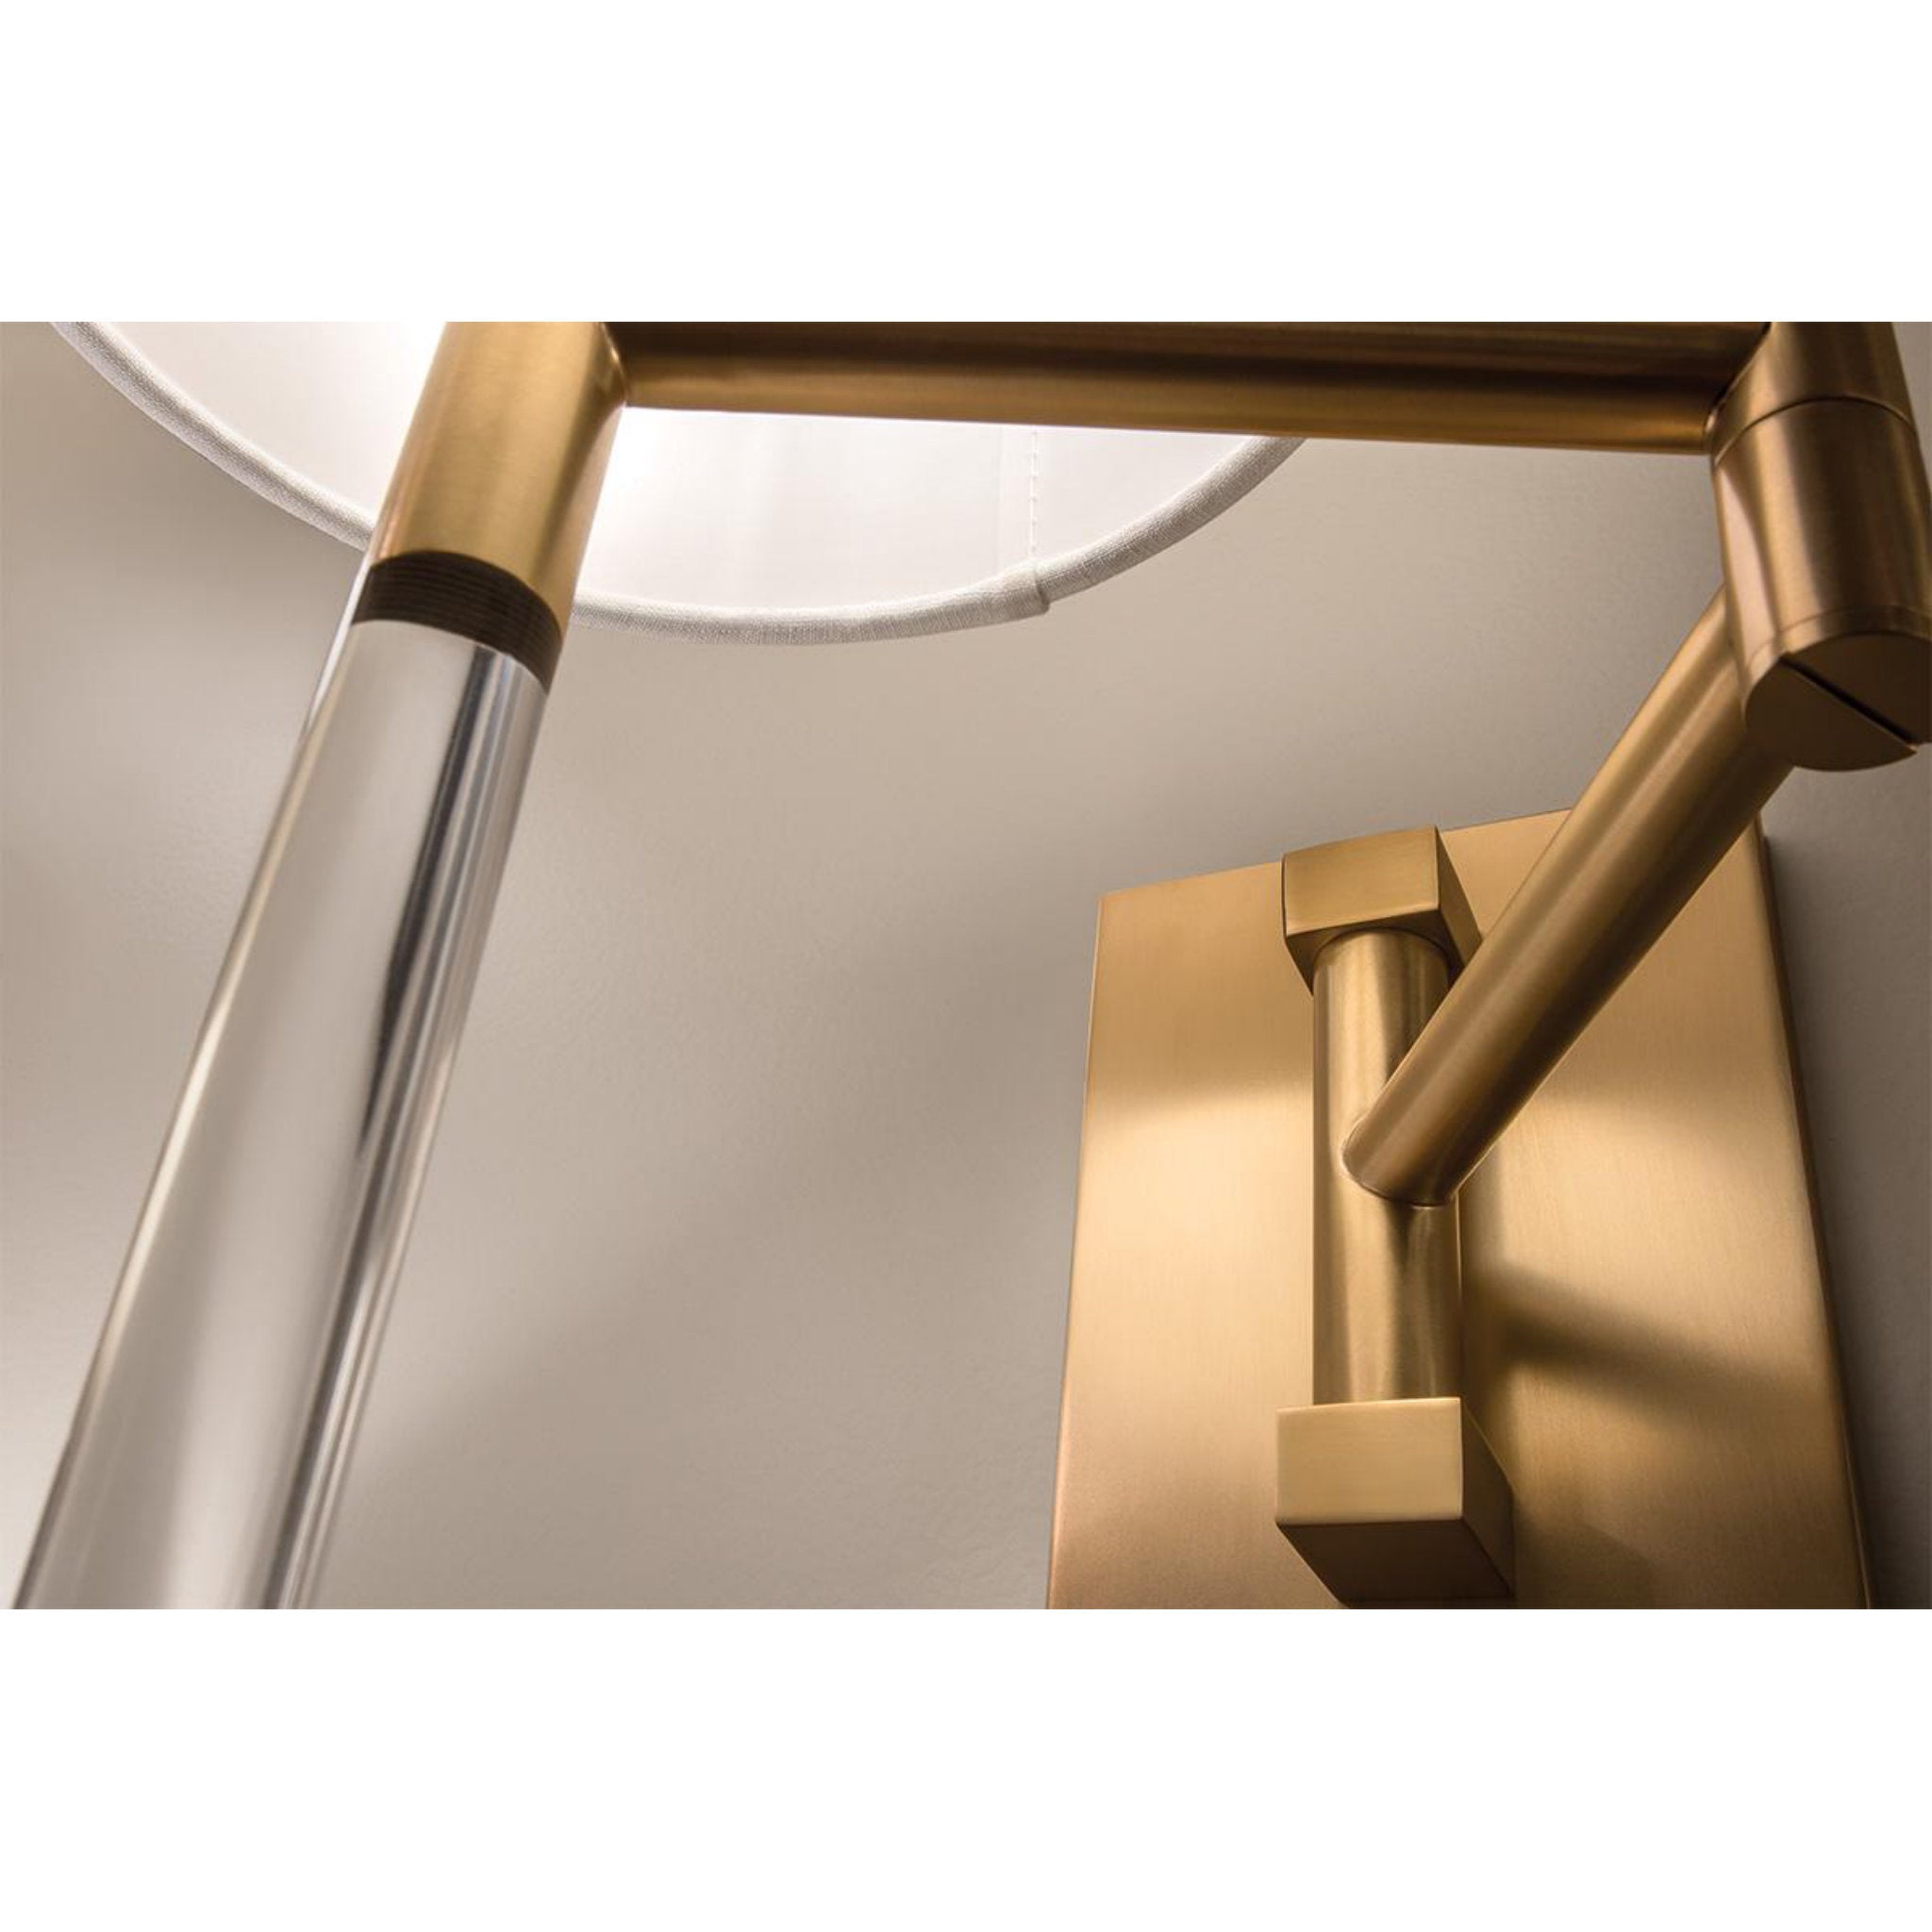 Englewood 1 Light Plug-in Sconce in Aged Brass